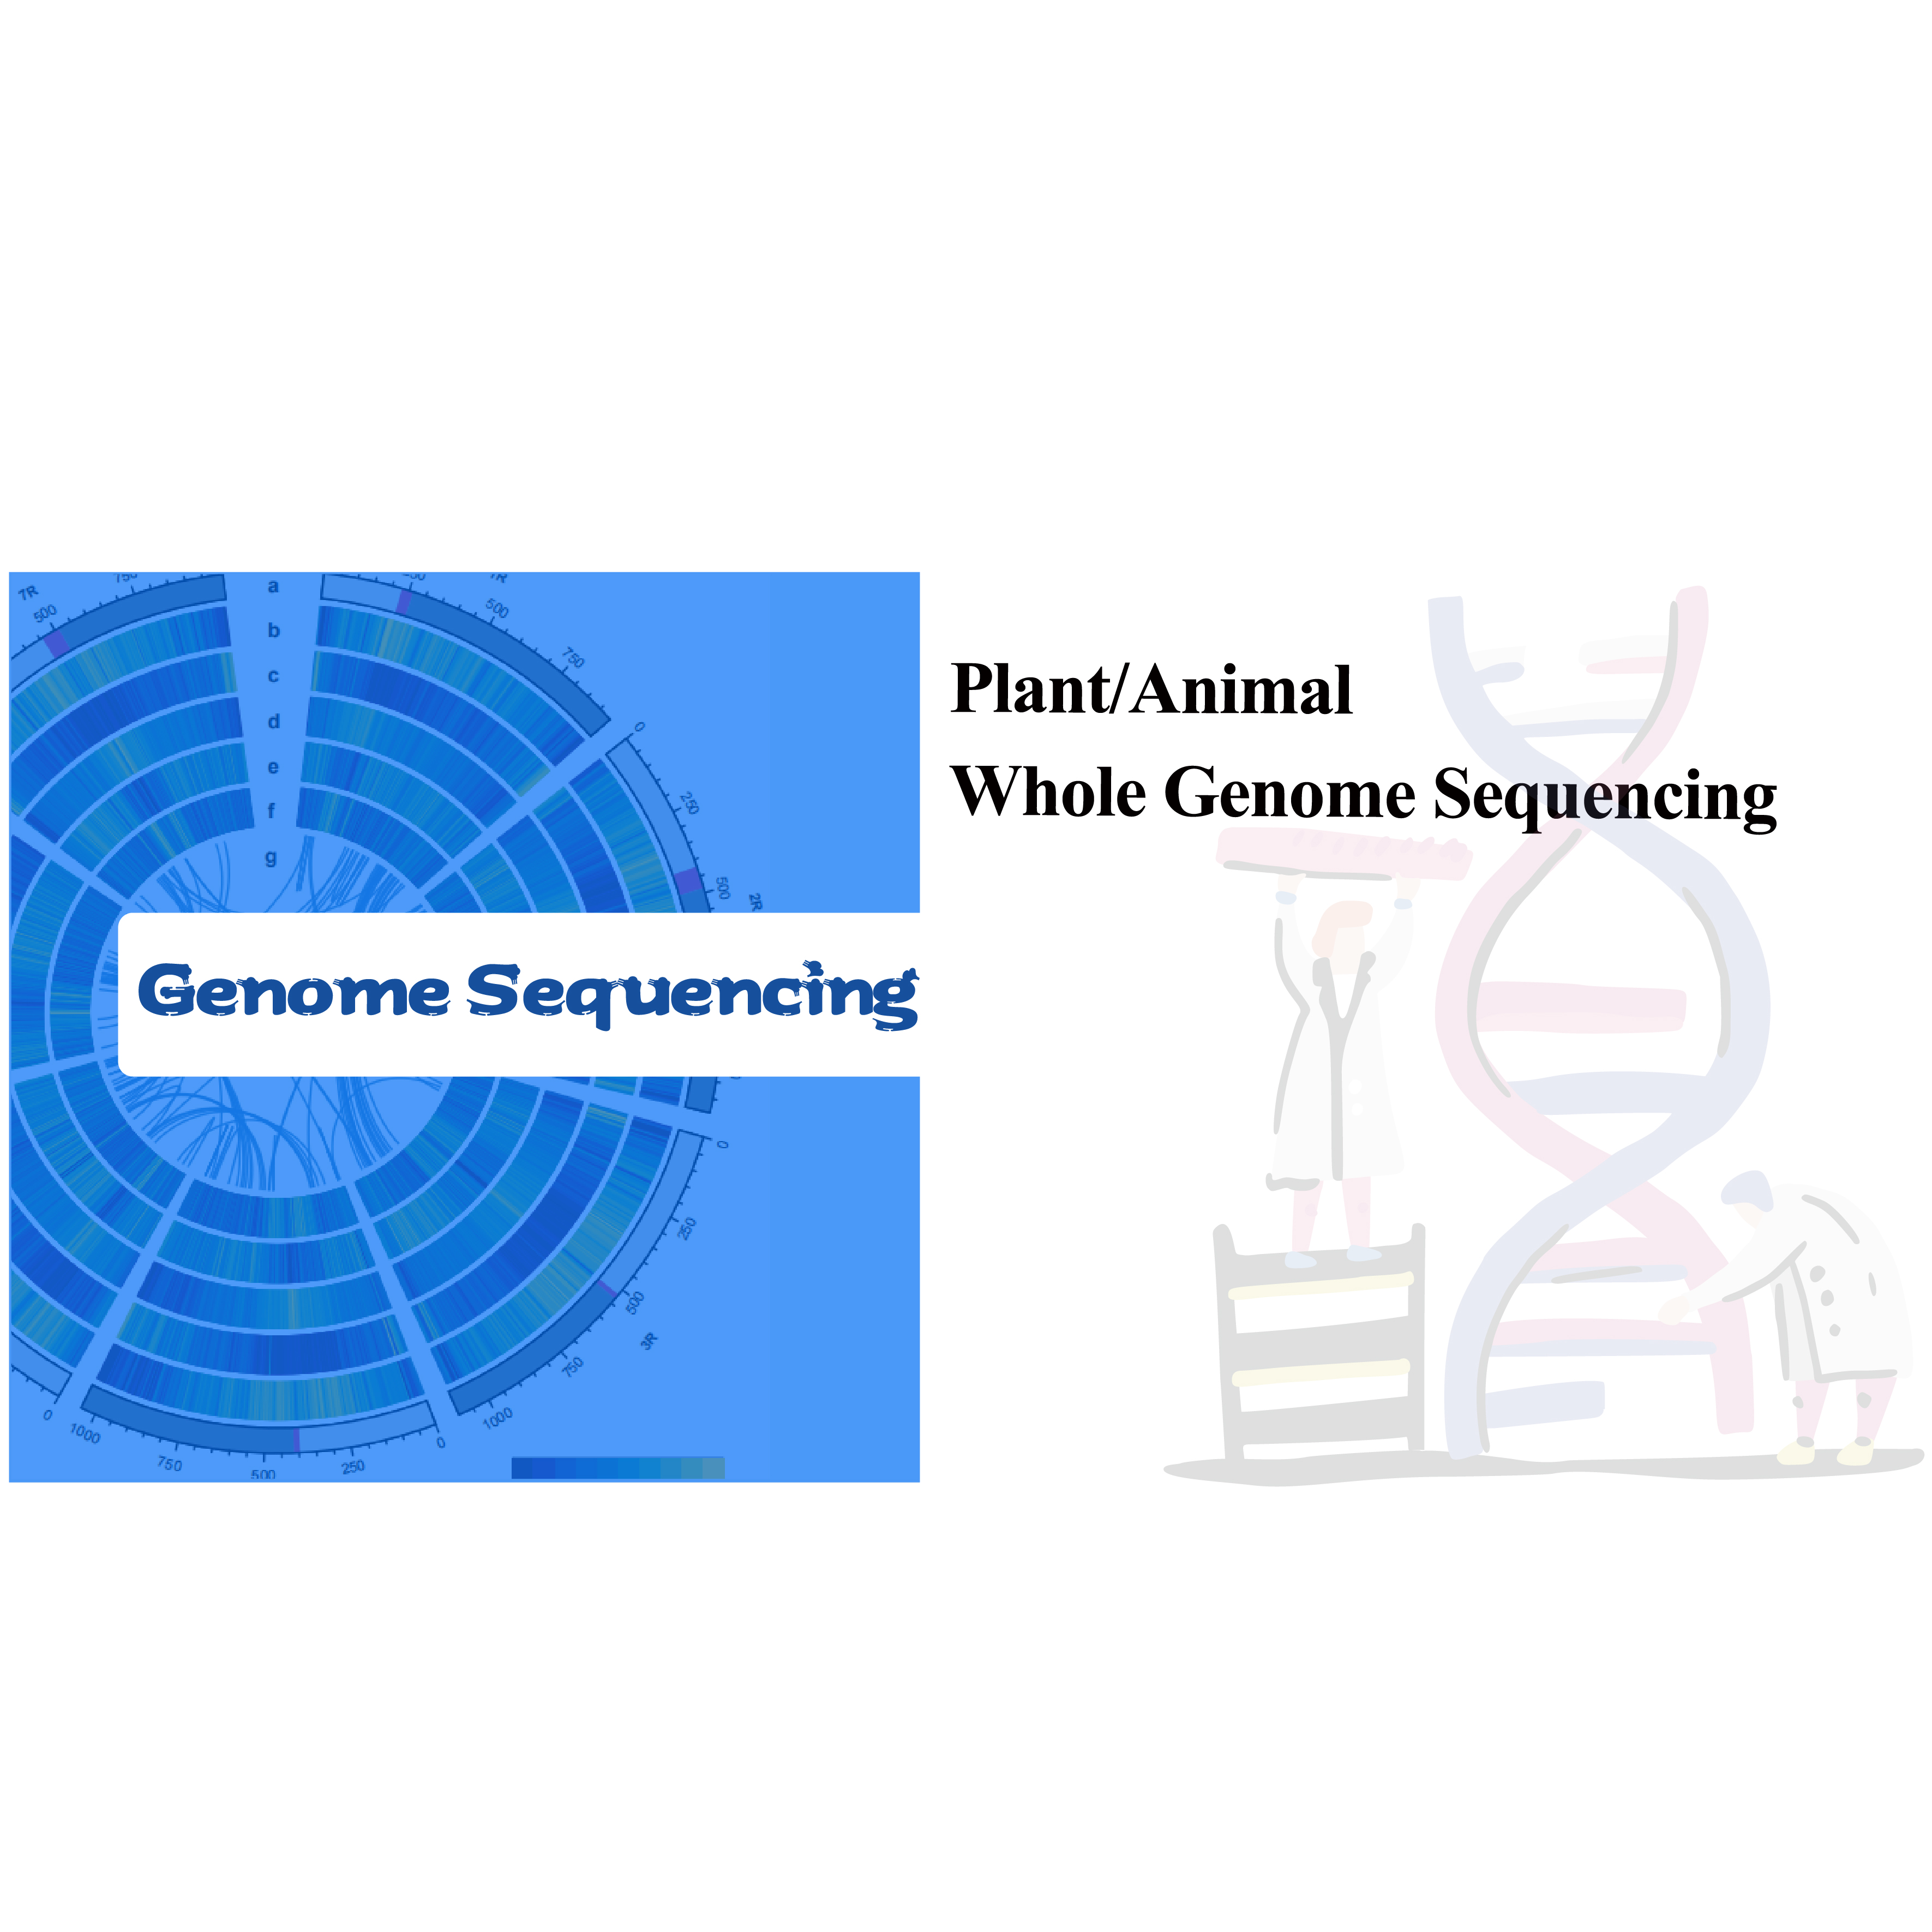 Plant/Animal Whole Genome Sequencing